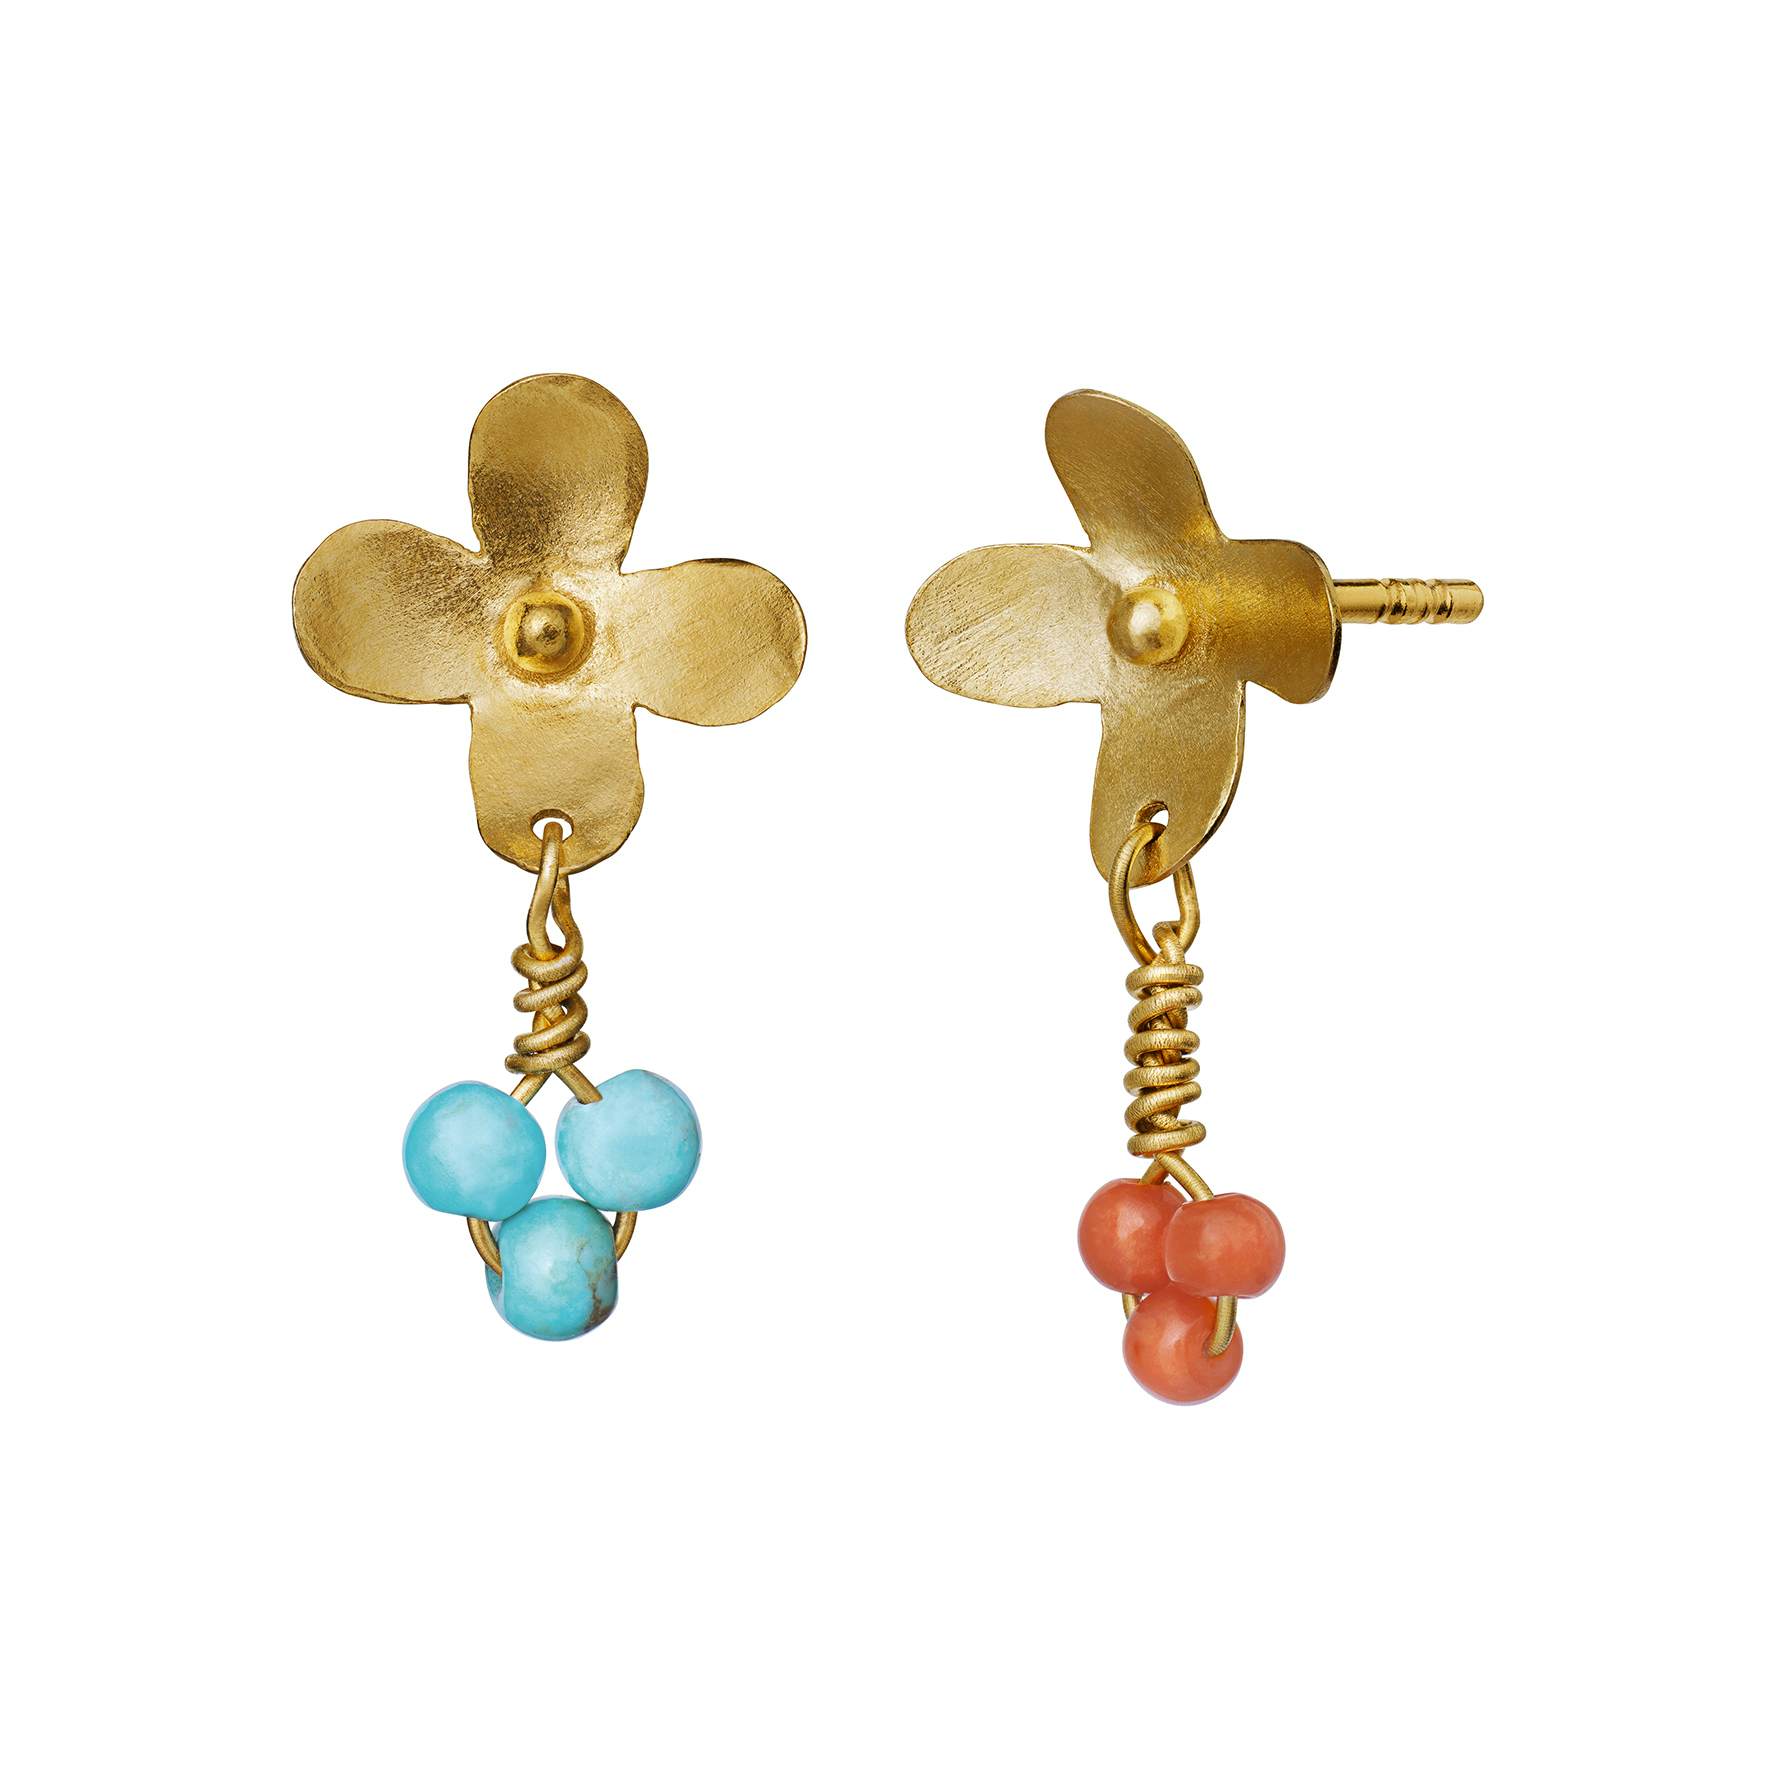 Buttercup Earrings from Maanesten in Goldplated-Silver Sterling 925| Turquoise,Coral